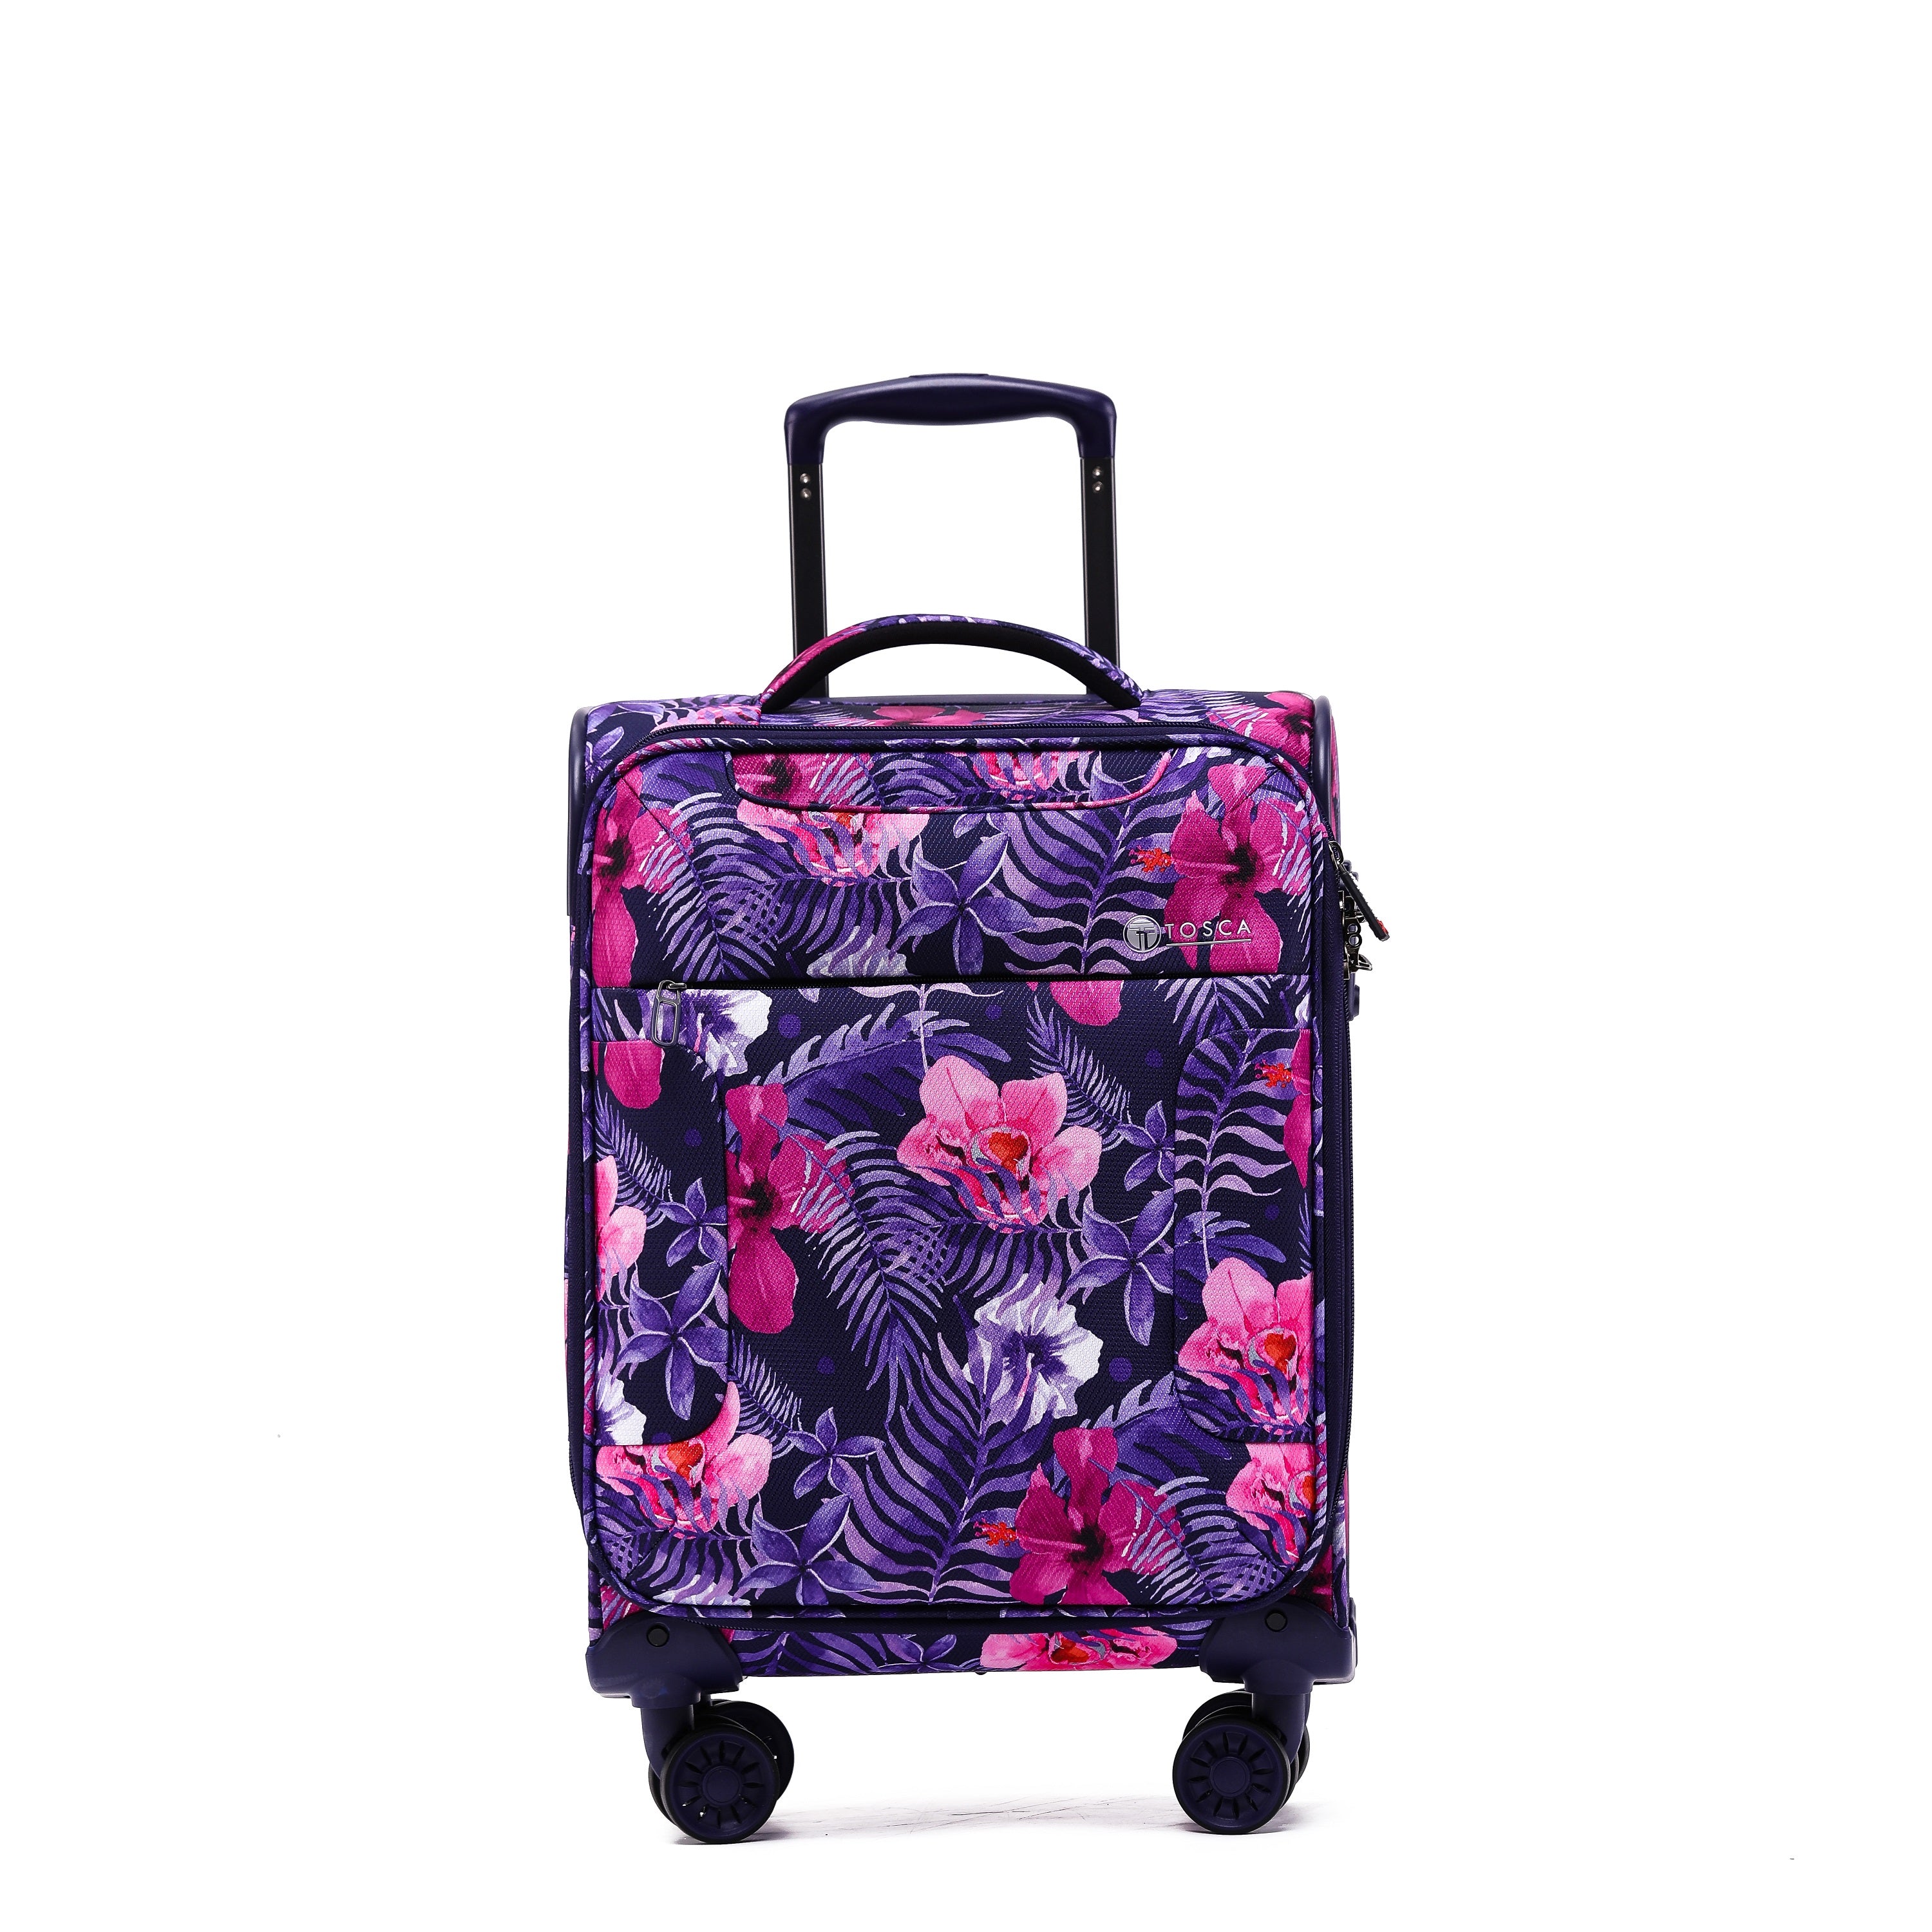 Tosca - So Lite 3.0 20in Small 4 Wheel Soft Suitcase - Flower-1